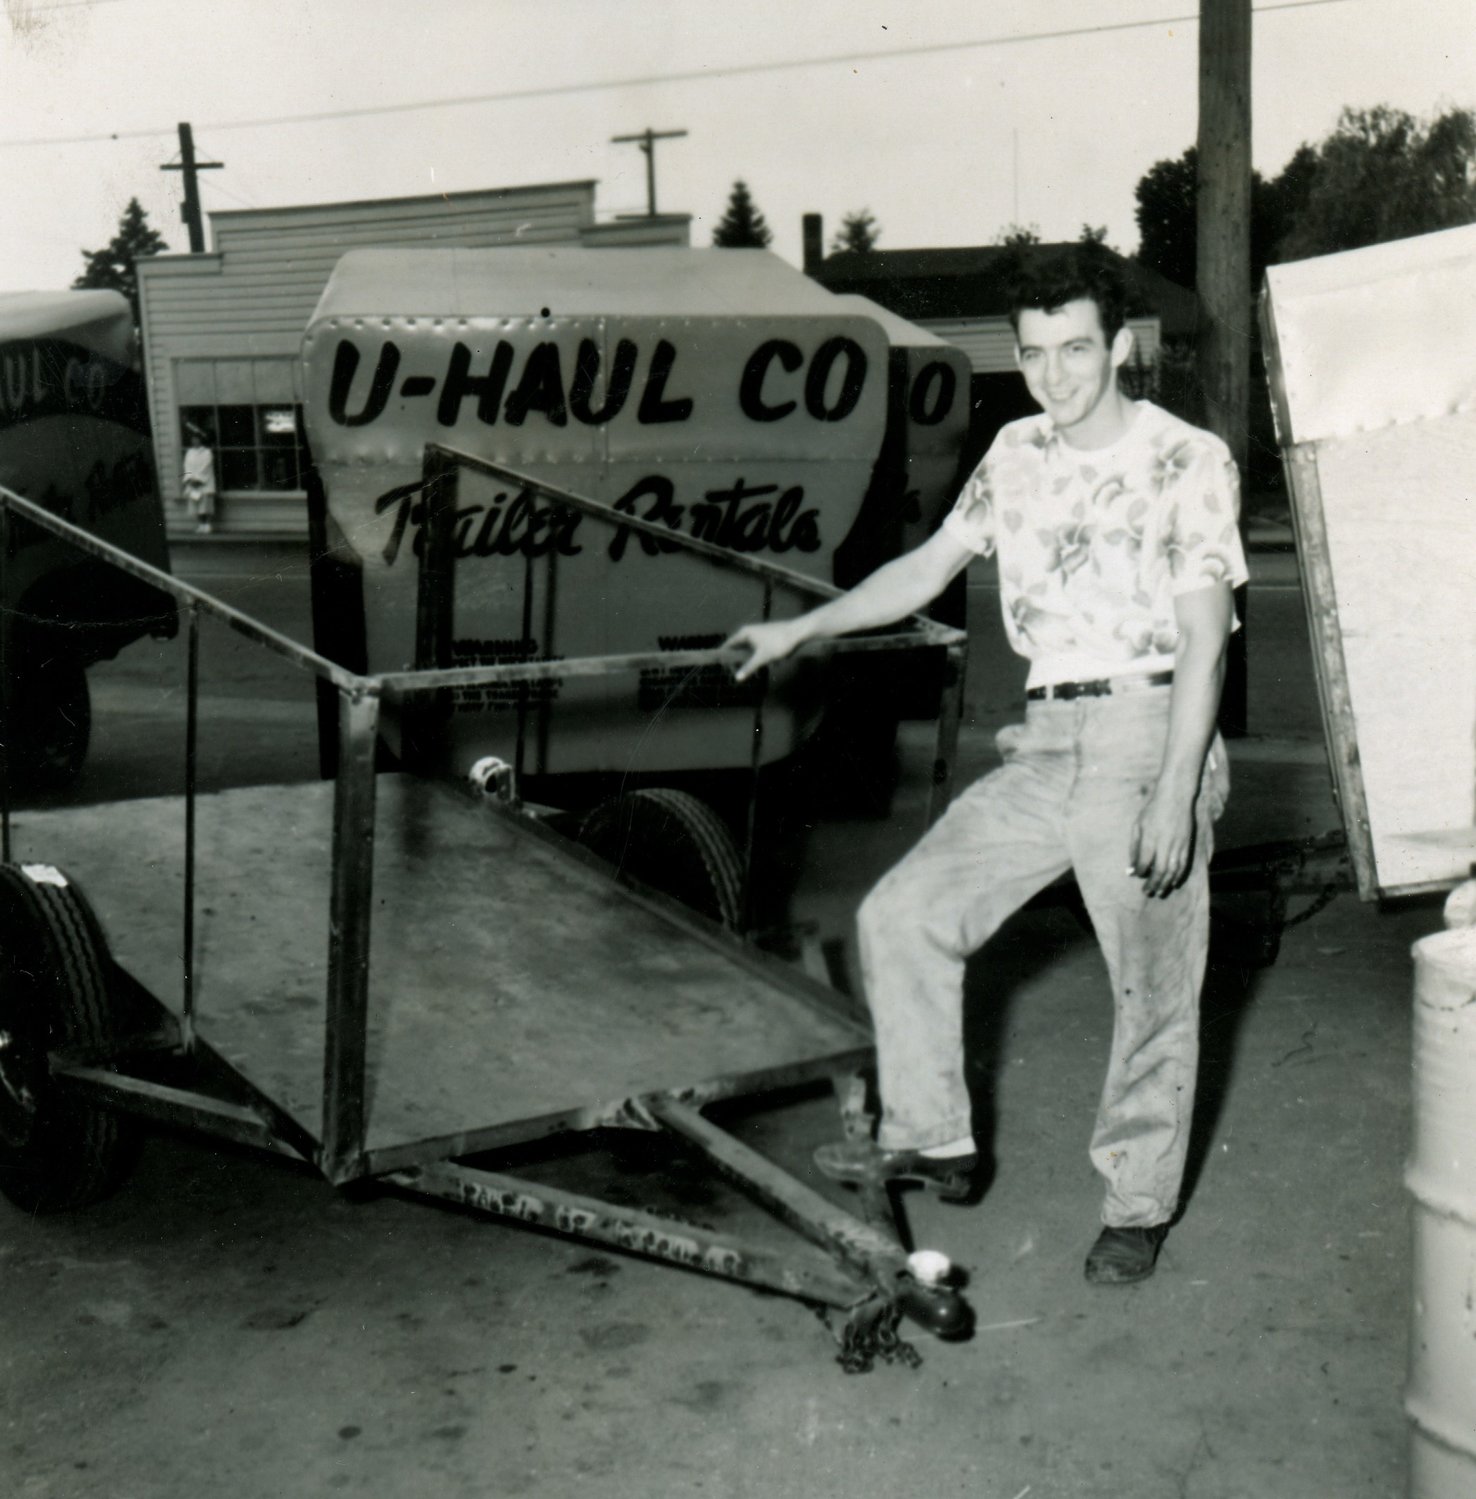 Hap Carty, U-Haul’s first employee, stands by a trailer at the business’ Portland shop in 1948.